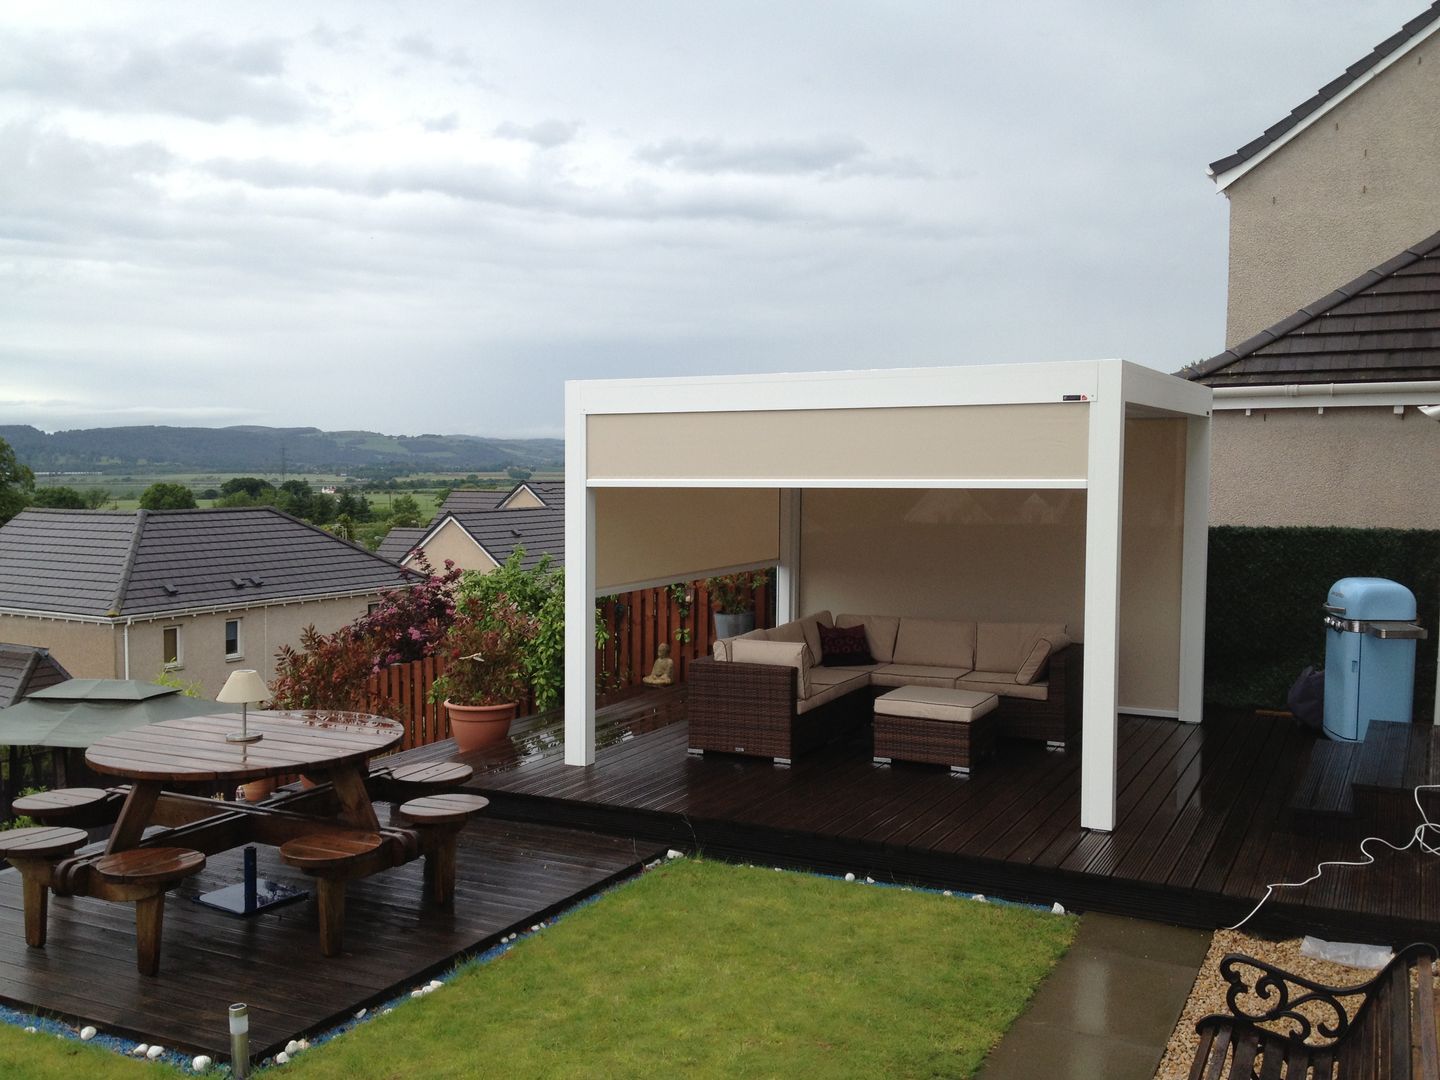 Outdoor Living Pod, Louvered Roof Patio Canopy Installation in the Scottish Borders. homify Jardines de estilo moderno outdoor living pod,louvered,roof,patio,terrace,canopy,garden,room